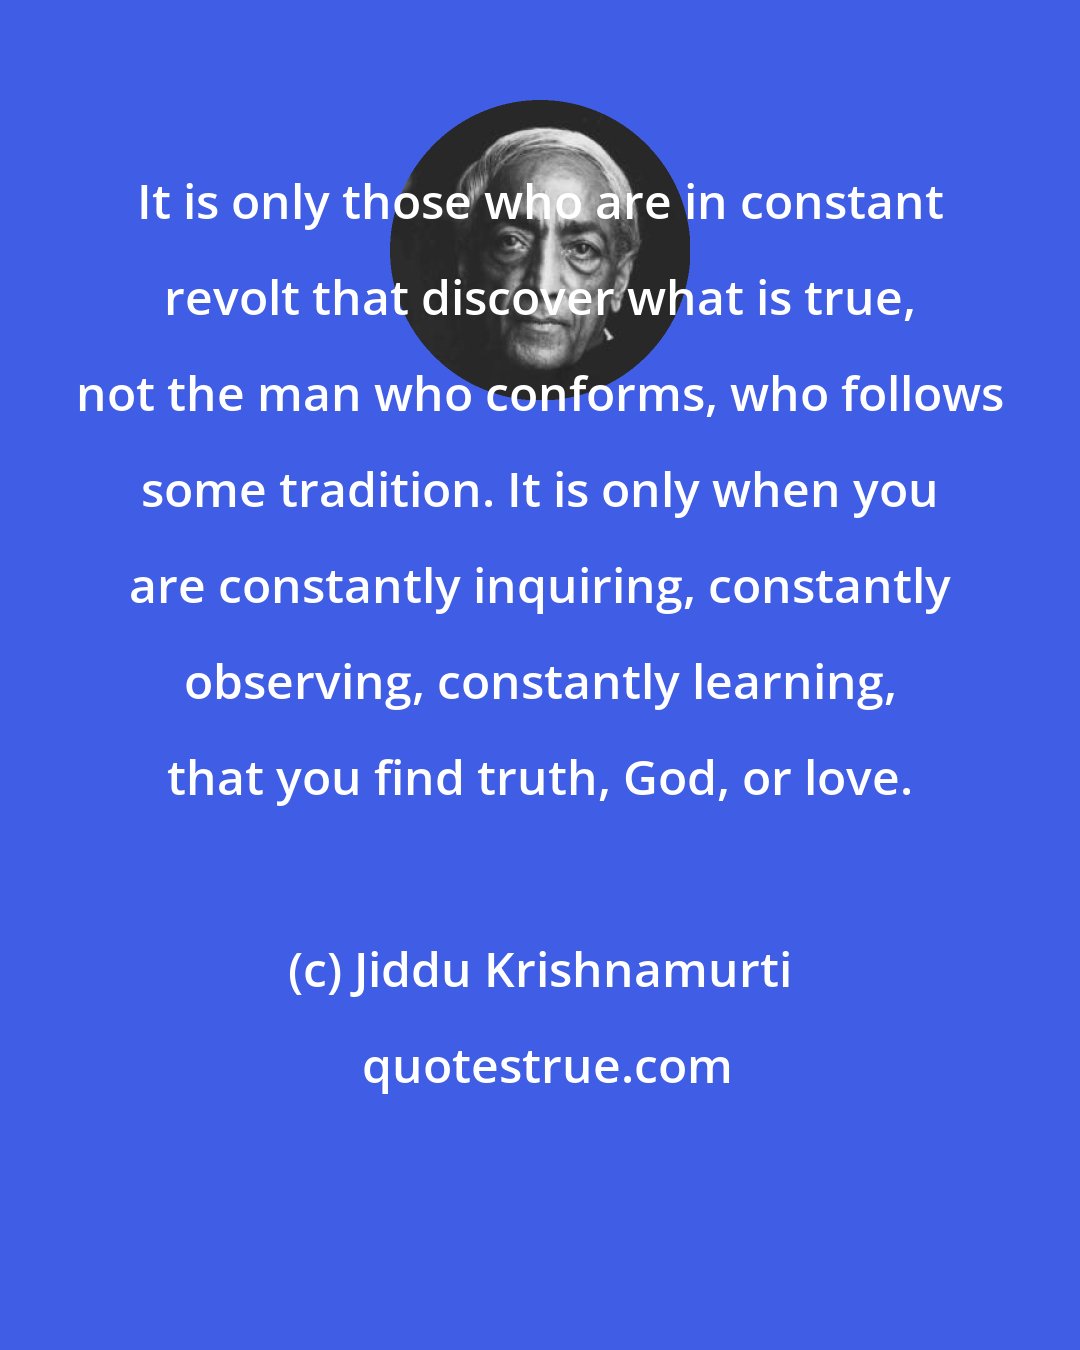 Jiddu Krishnamurti: It is only those who are in constant revolt that discover what is true, not the man who conforms, who follows some tradition. It is only when you are constantly inquiring, constantly observing, constantly learning, that you find truth, God, or love.